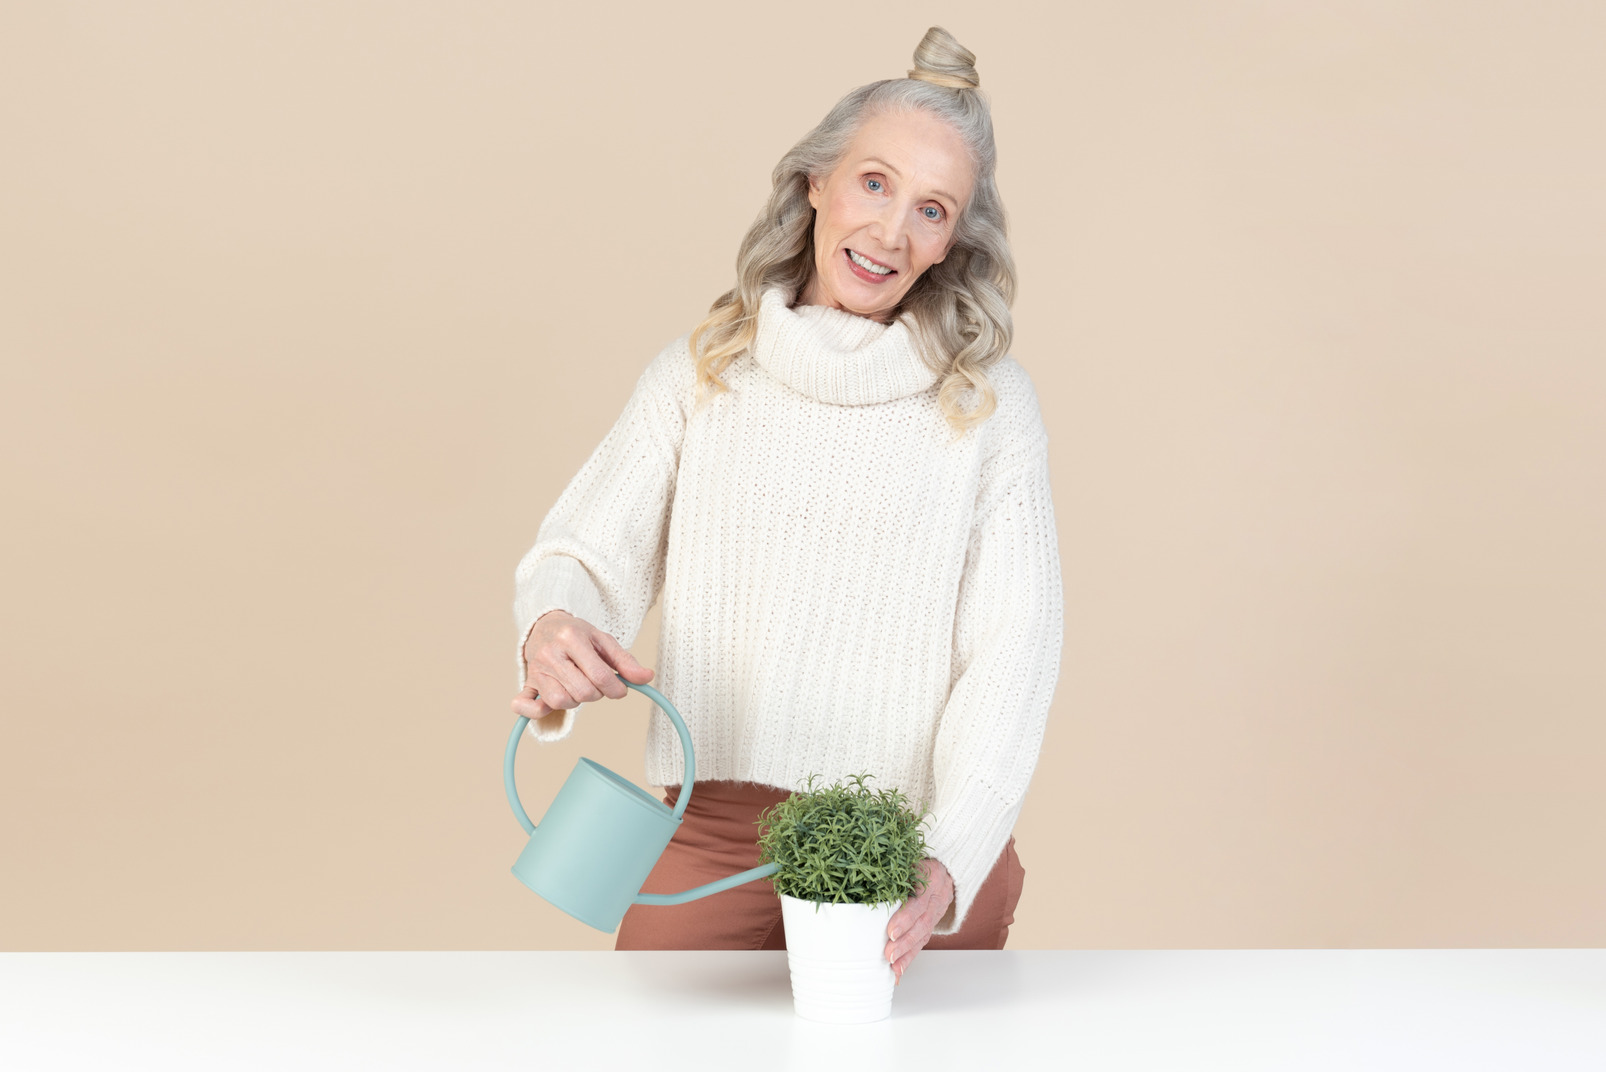 Smiling old woman watering plants